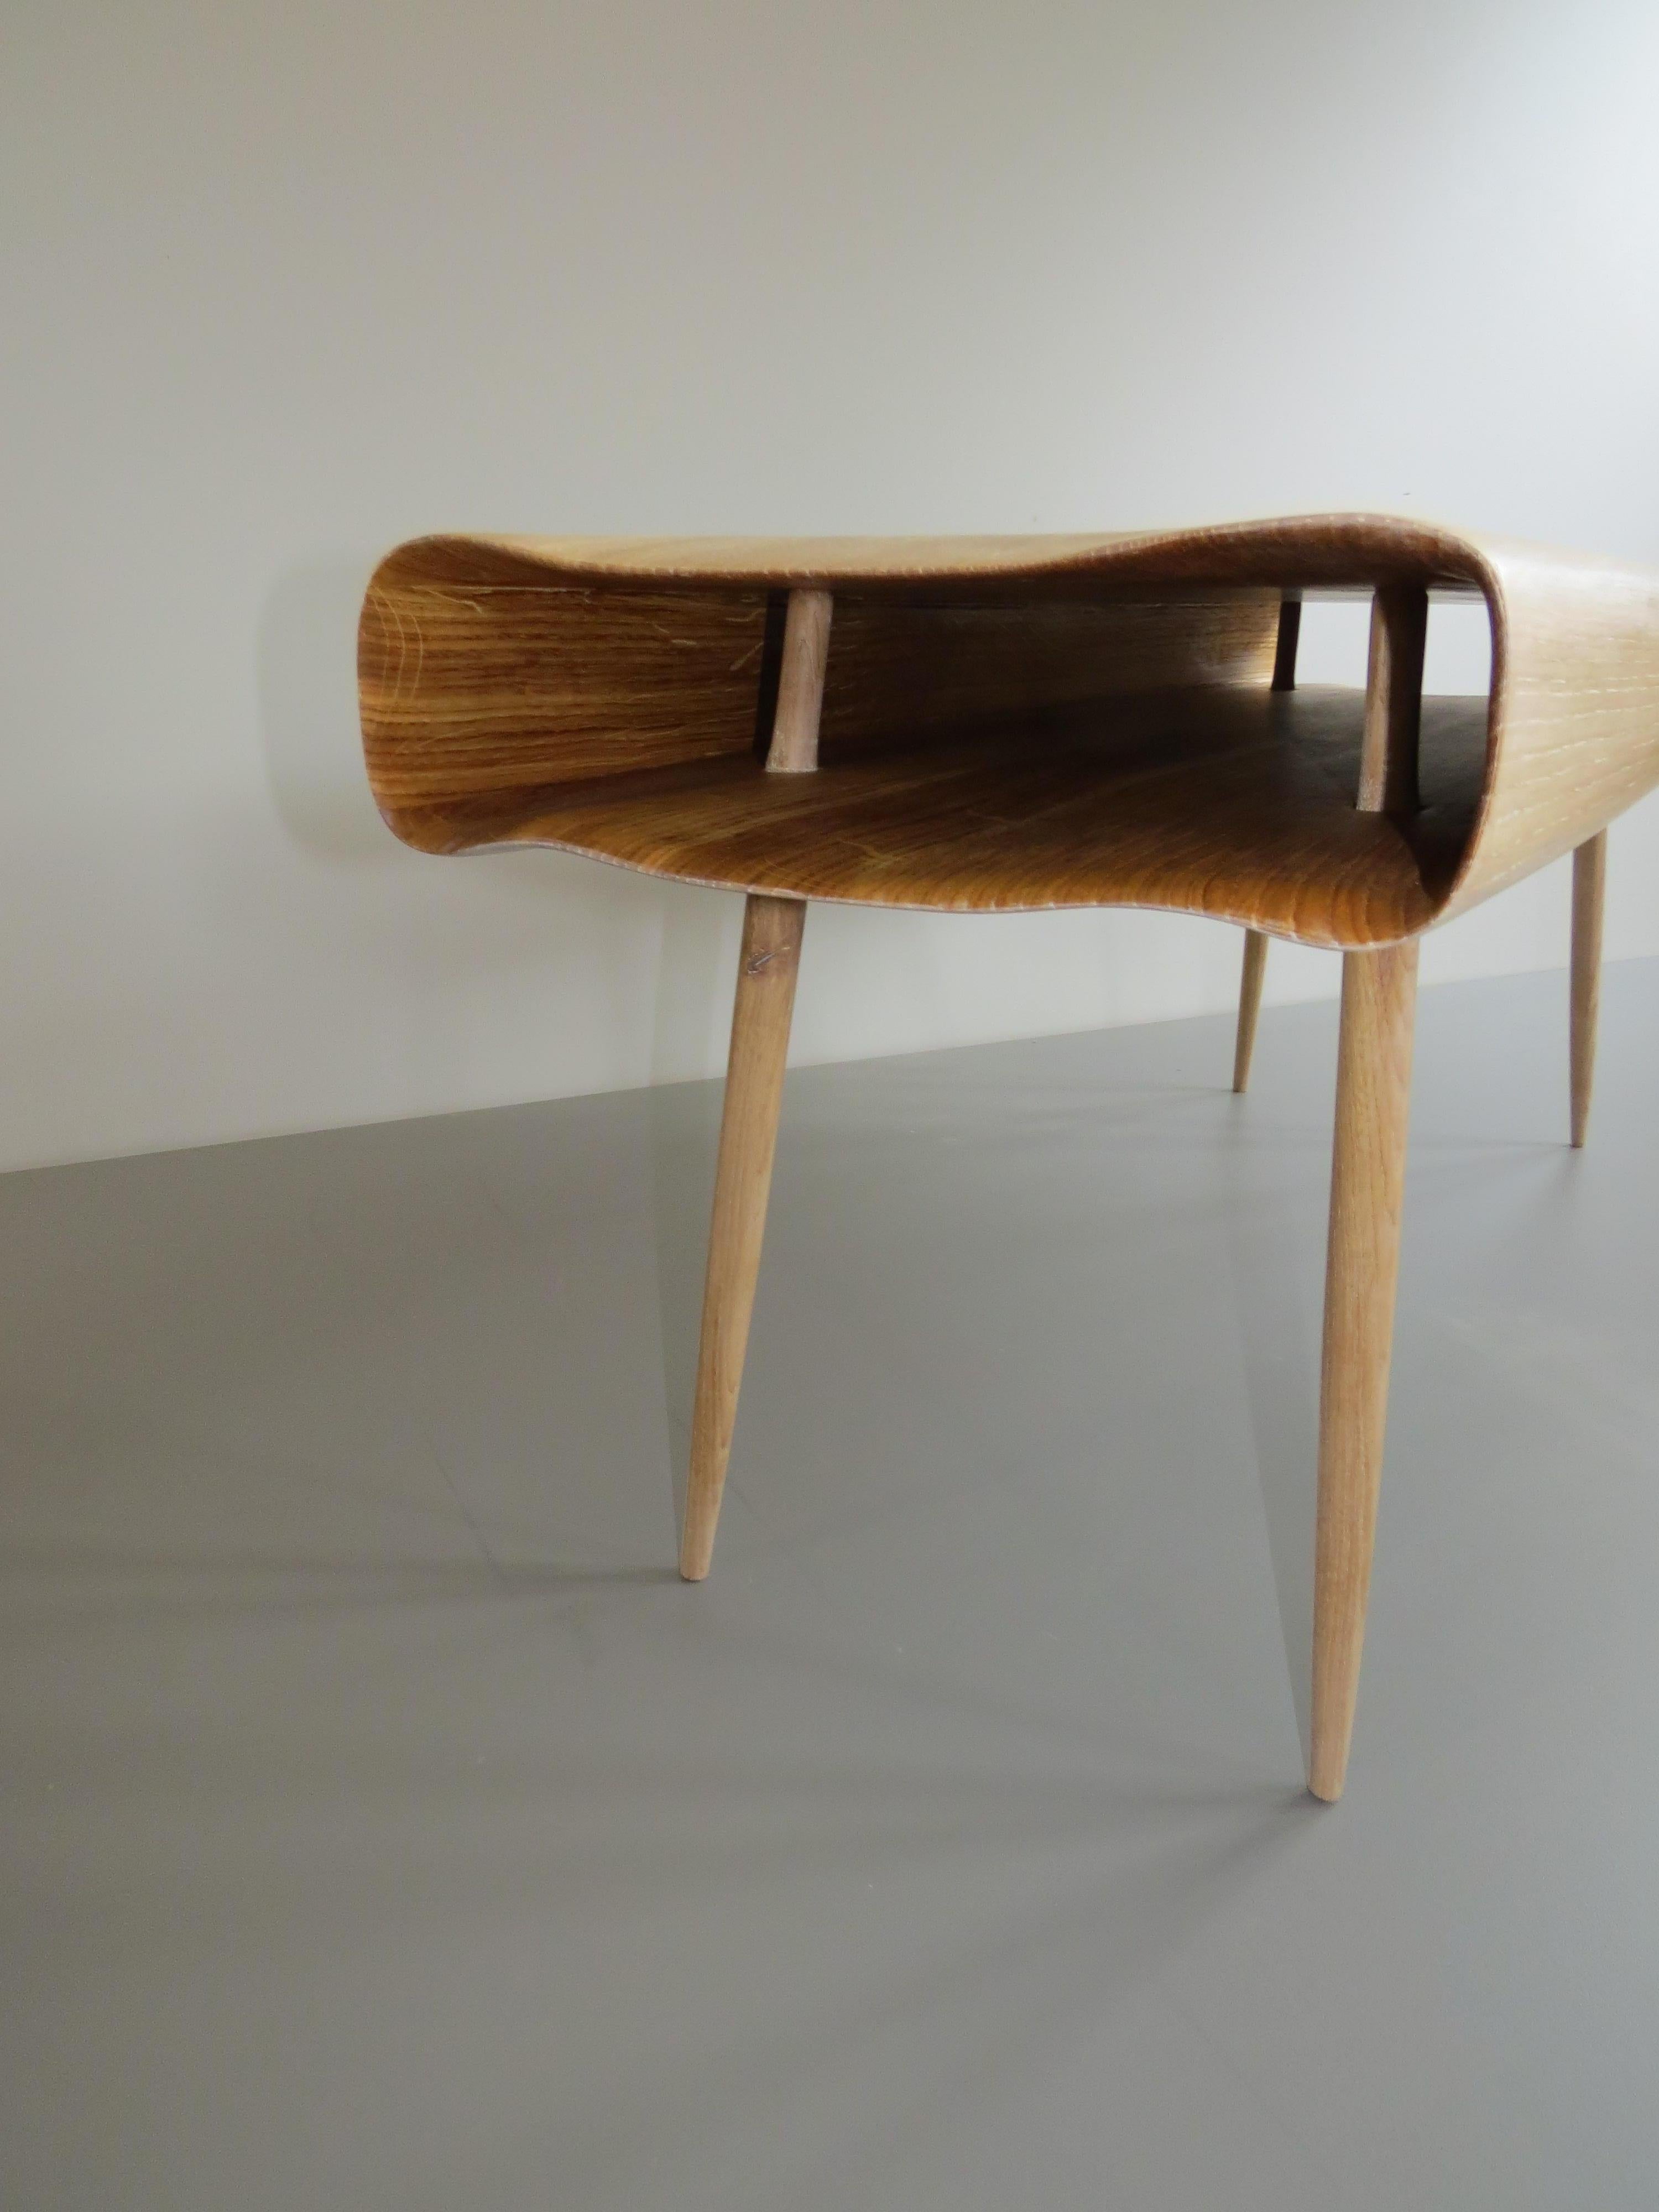 Bench, solid wood, handmade, organic modern, made in Germany, made to measur  In New Condition For Sale In Dietmannsried, Bavaria